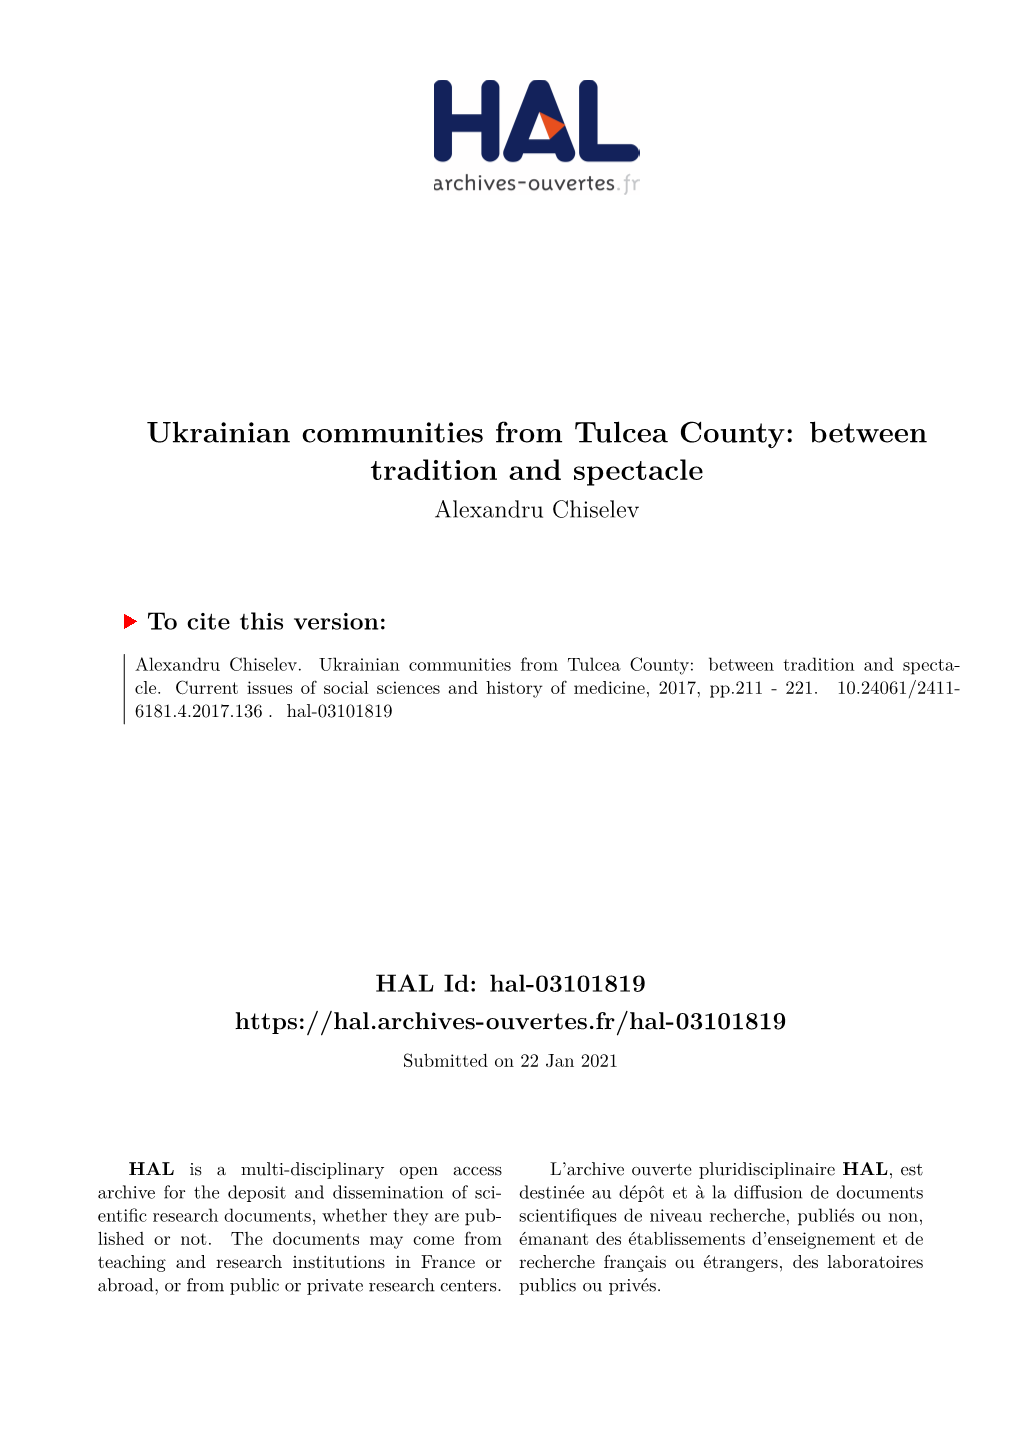 Ukrainian Communities from Tulcea County: Between Tradition and Spectacle Alexandru Chiselev